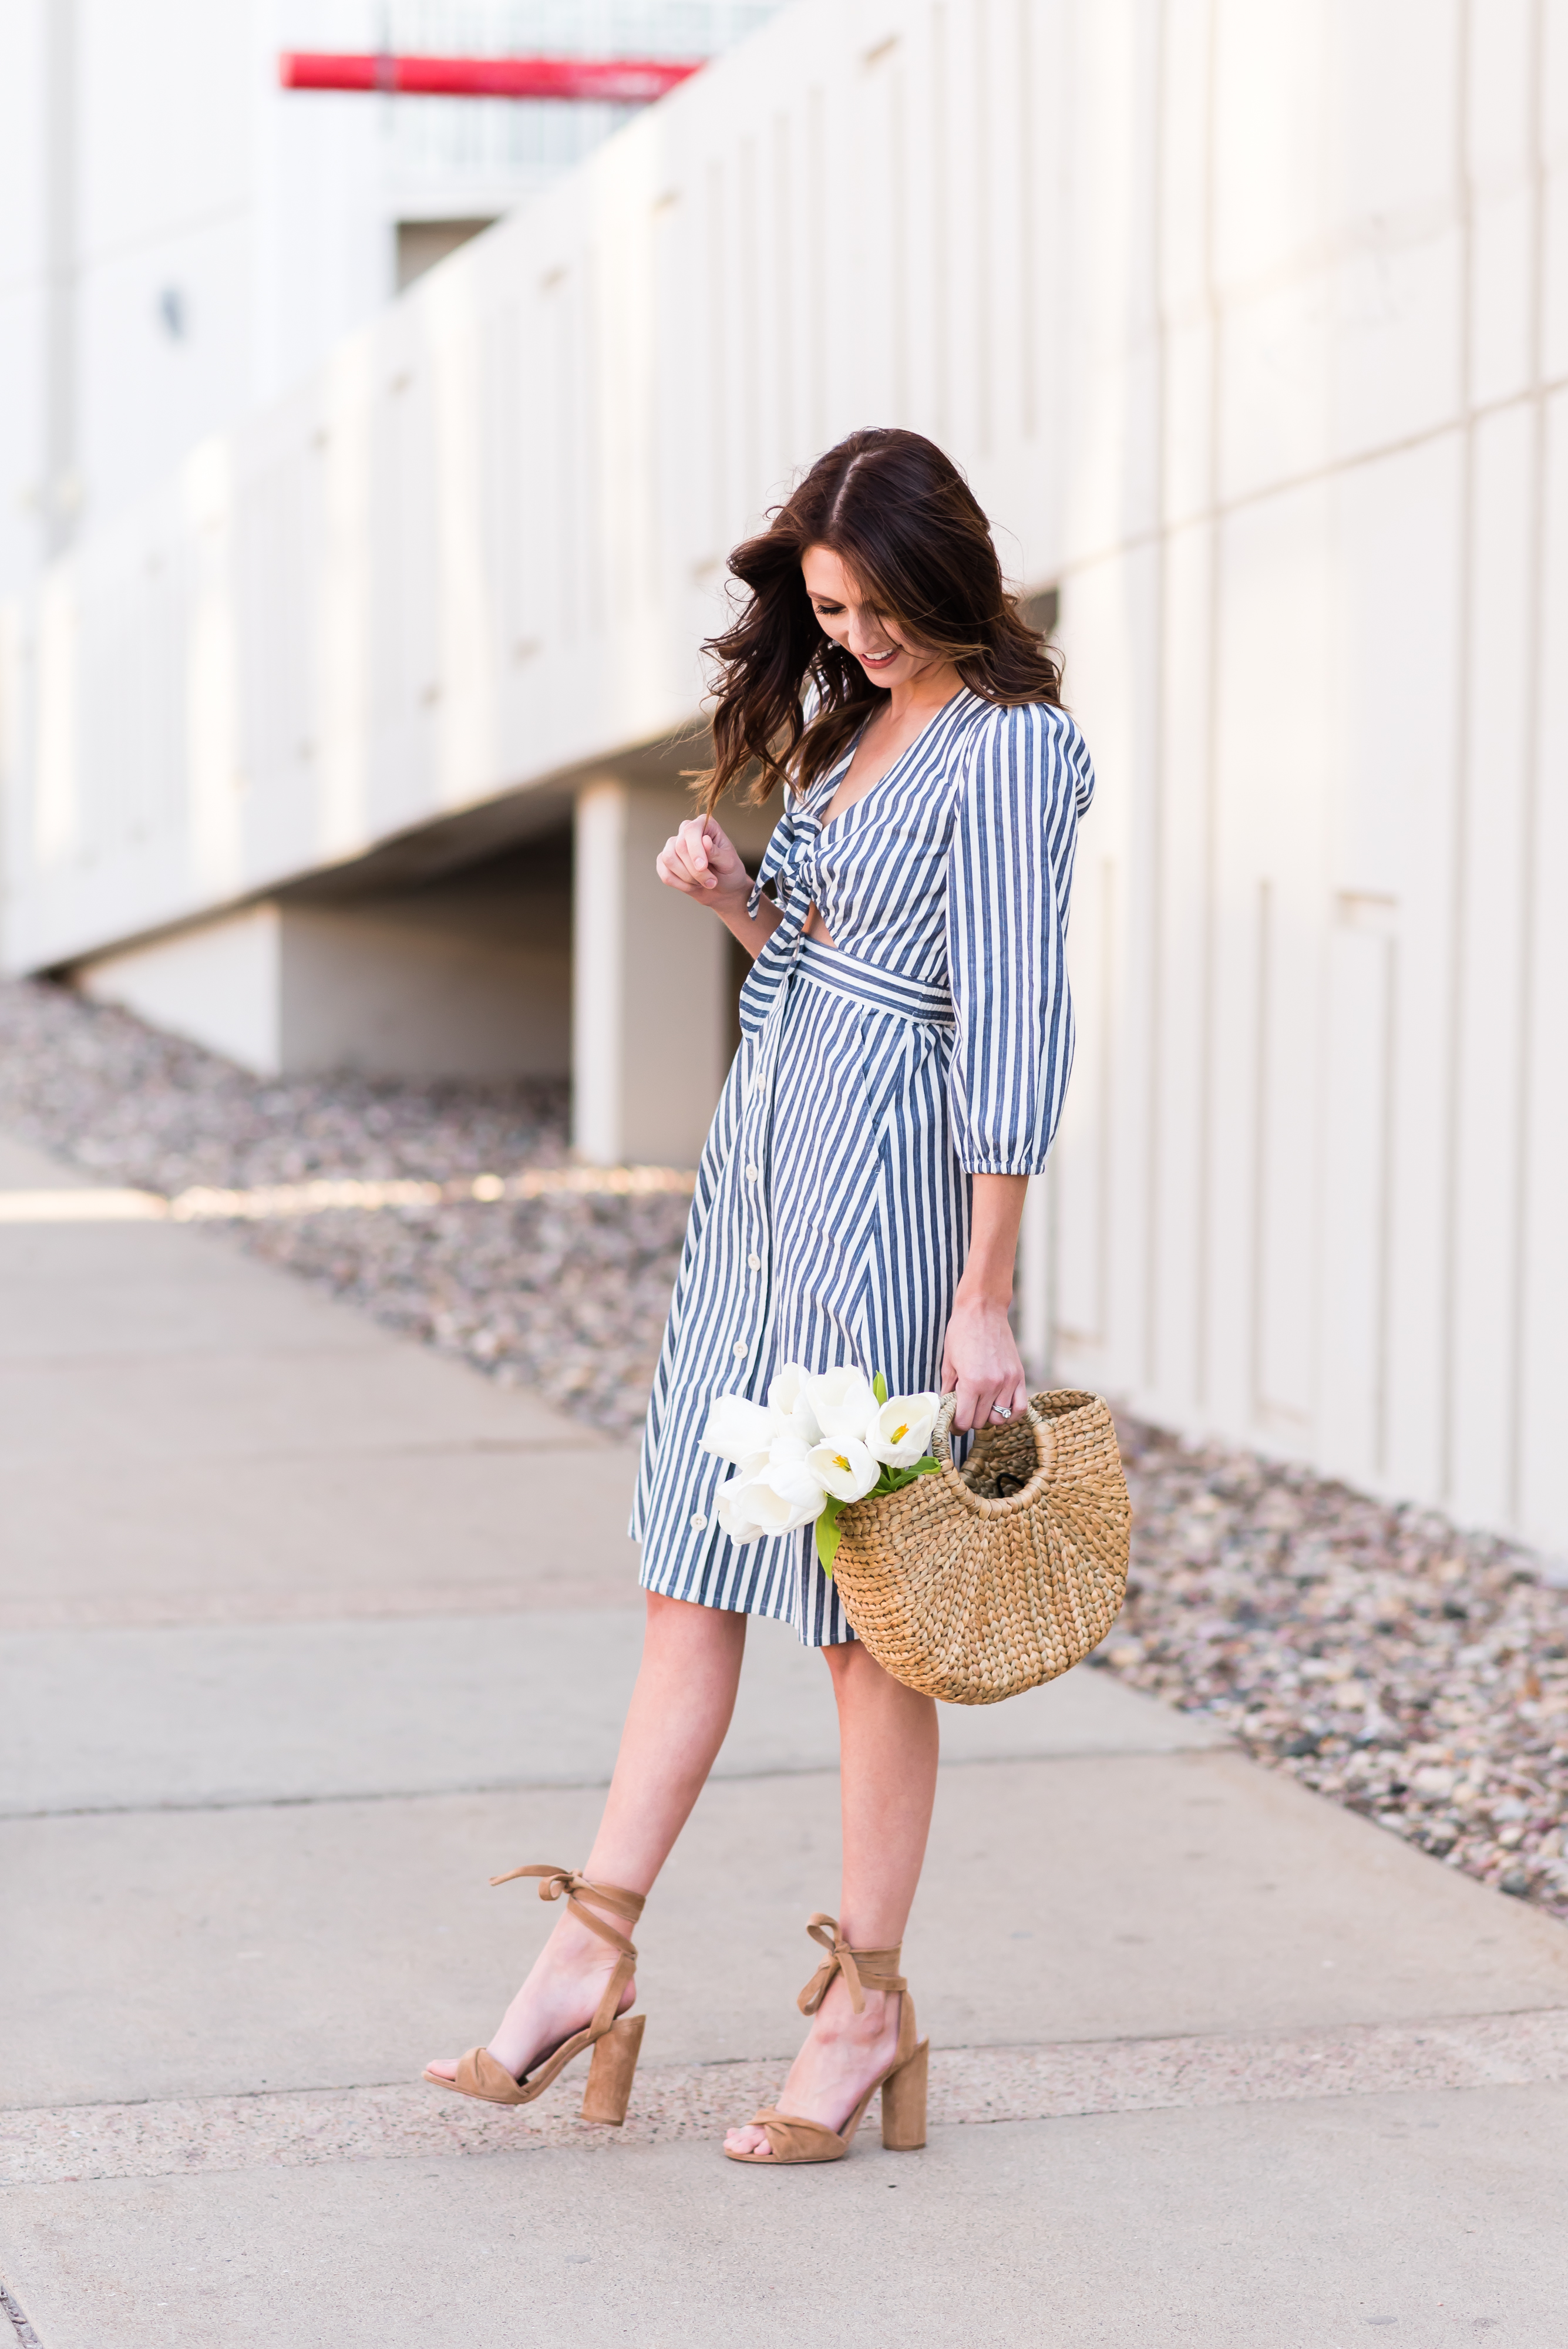 Tie Front Dresses - Midwest In Style